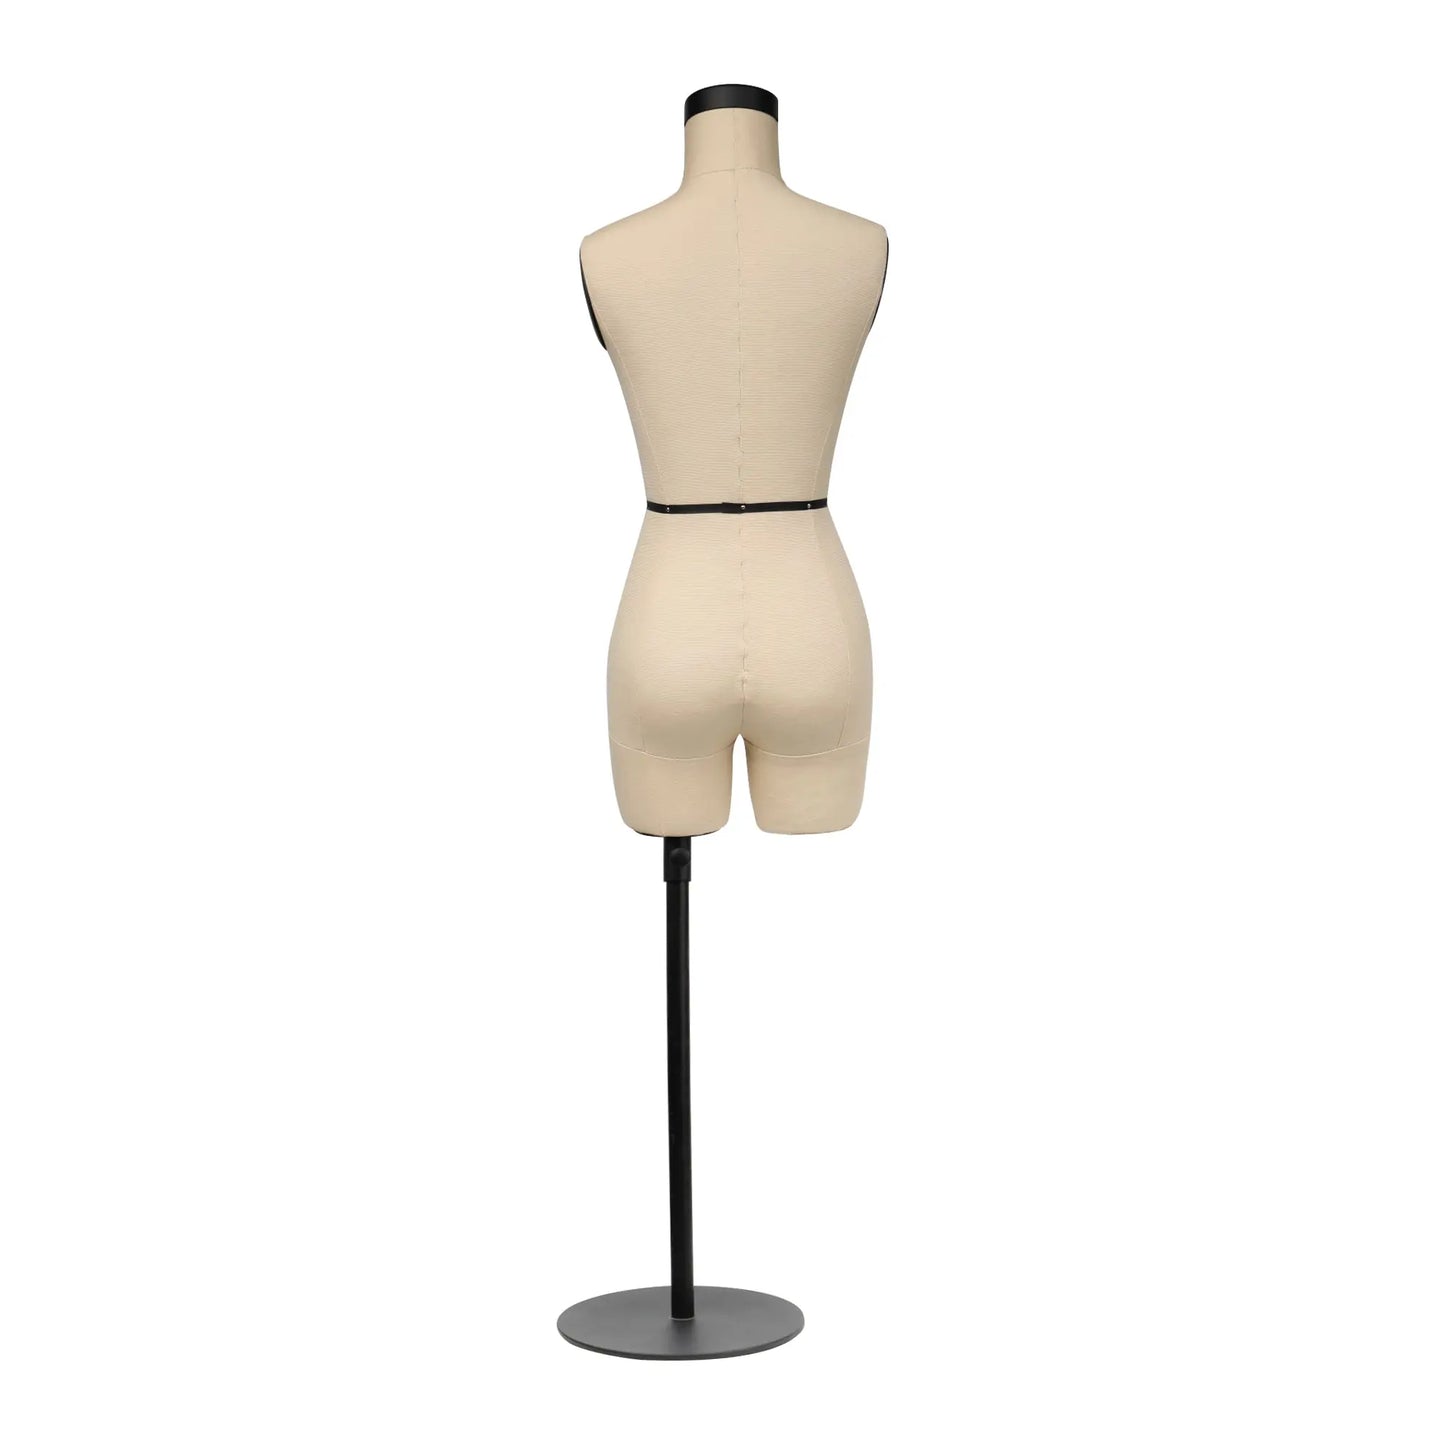 DE-LIANG Half Scale Dress Form 1:2 Size Sewing Half Size Mannequin Not Fully Pinable Dressmaker Dummy Female Torso Tailor Model for Draping,Size 6 Model